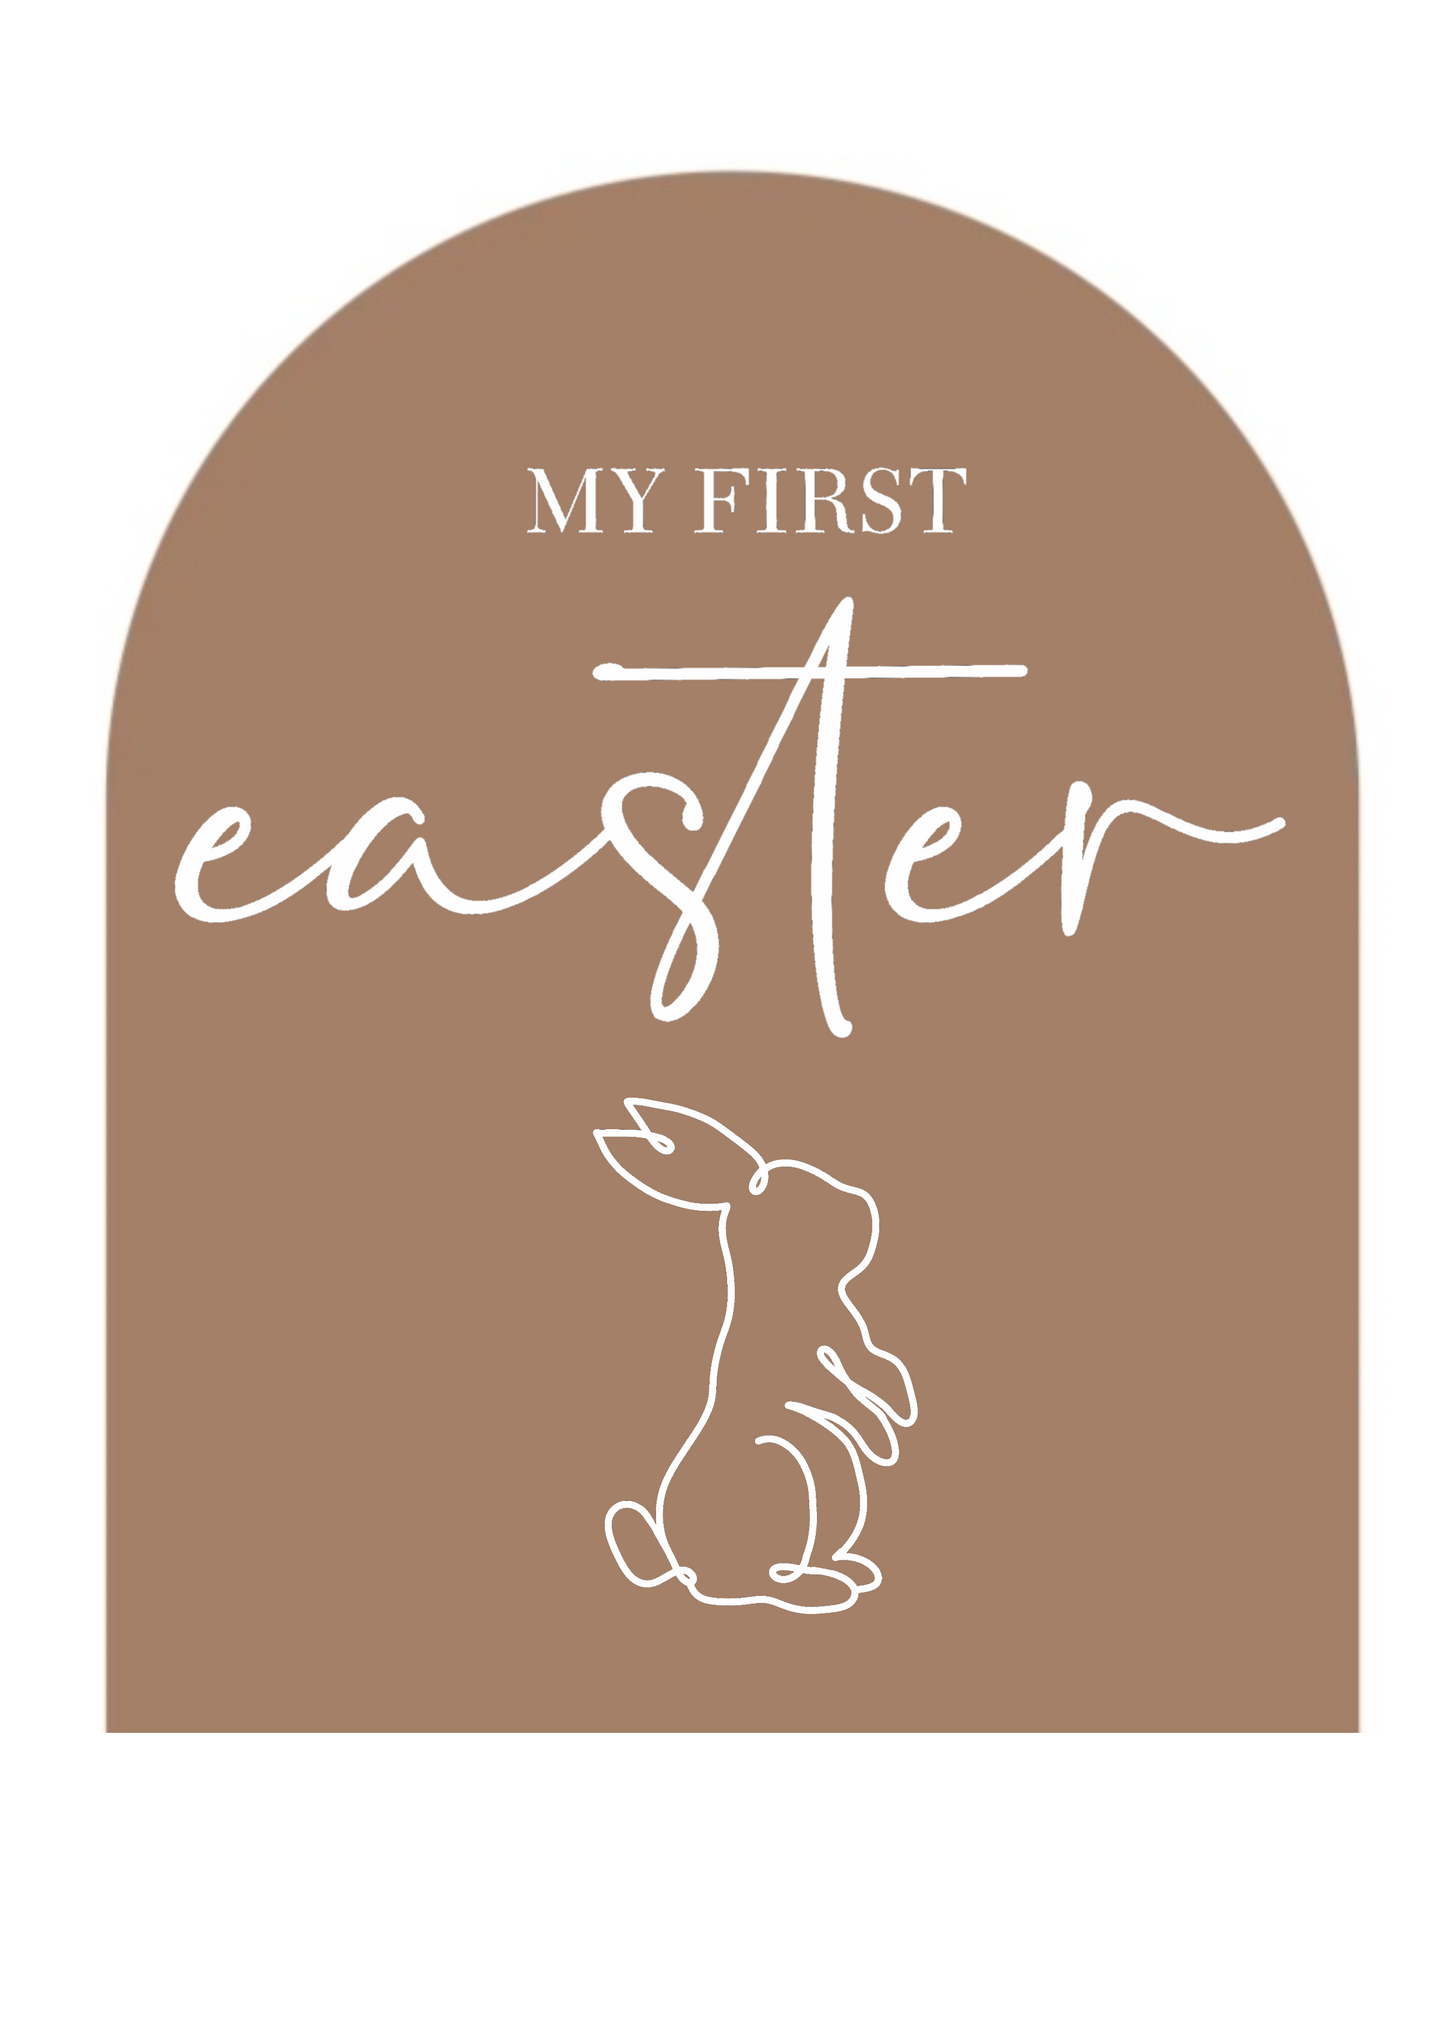 My First Easter sign